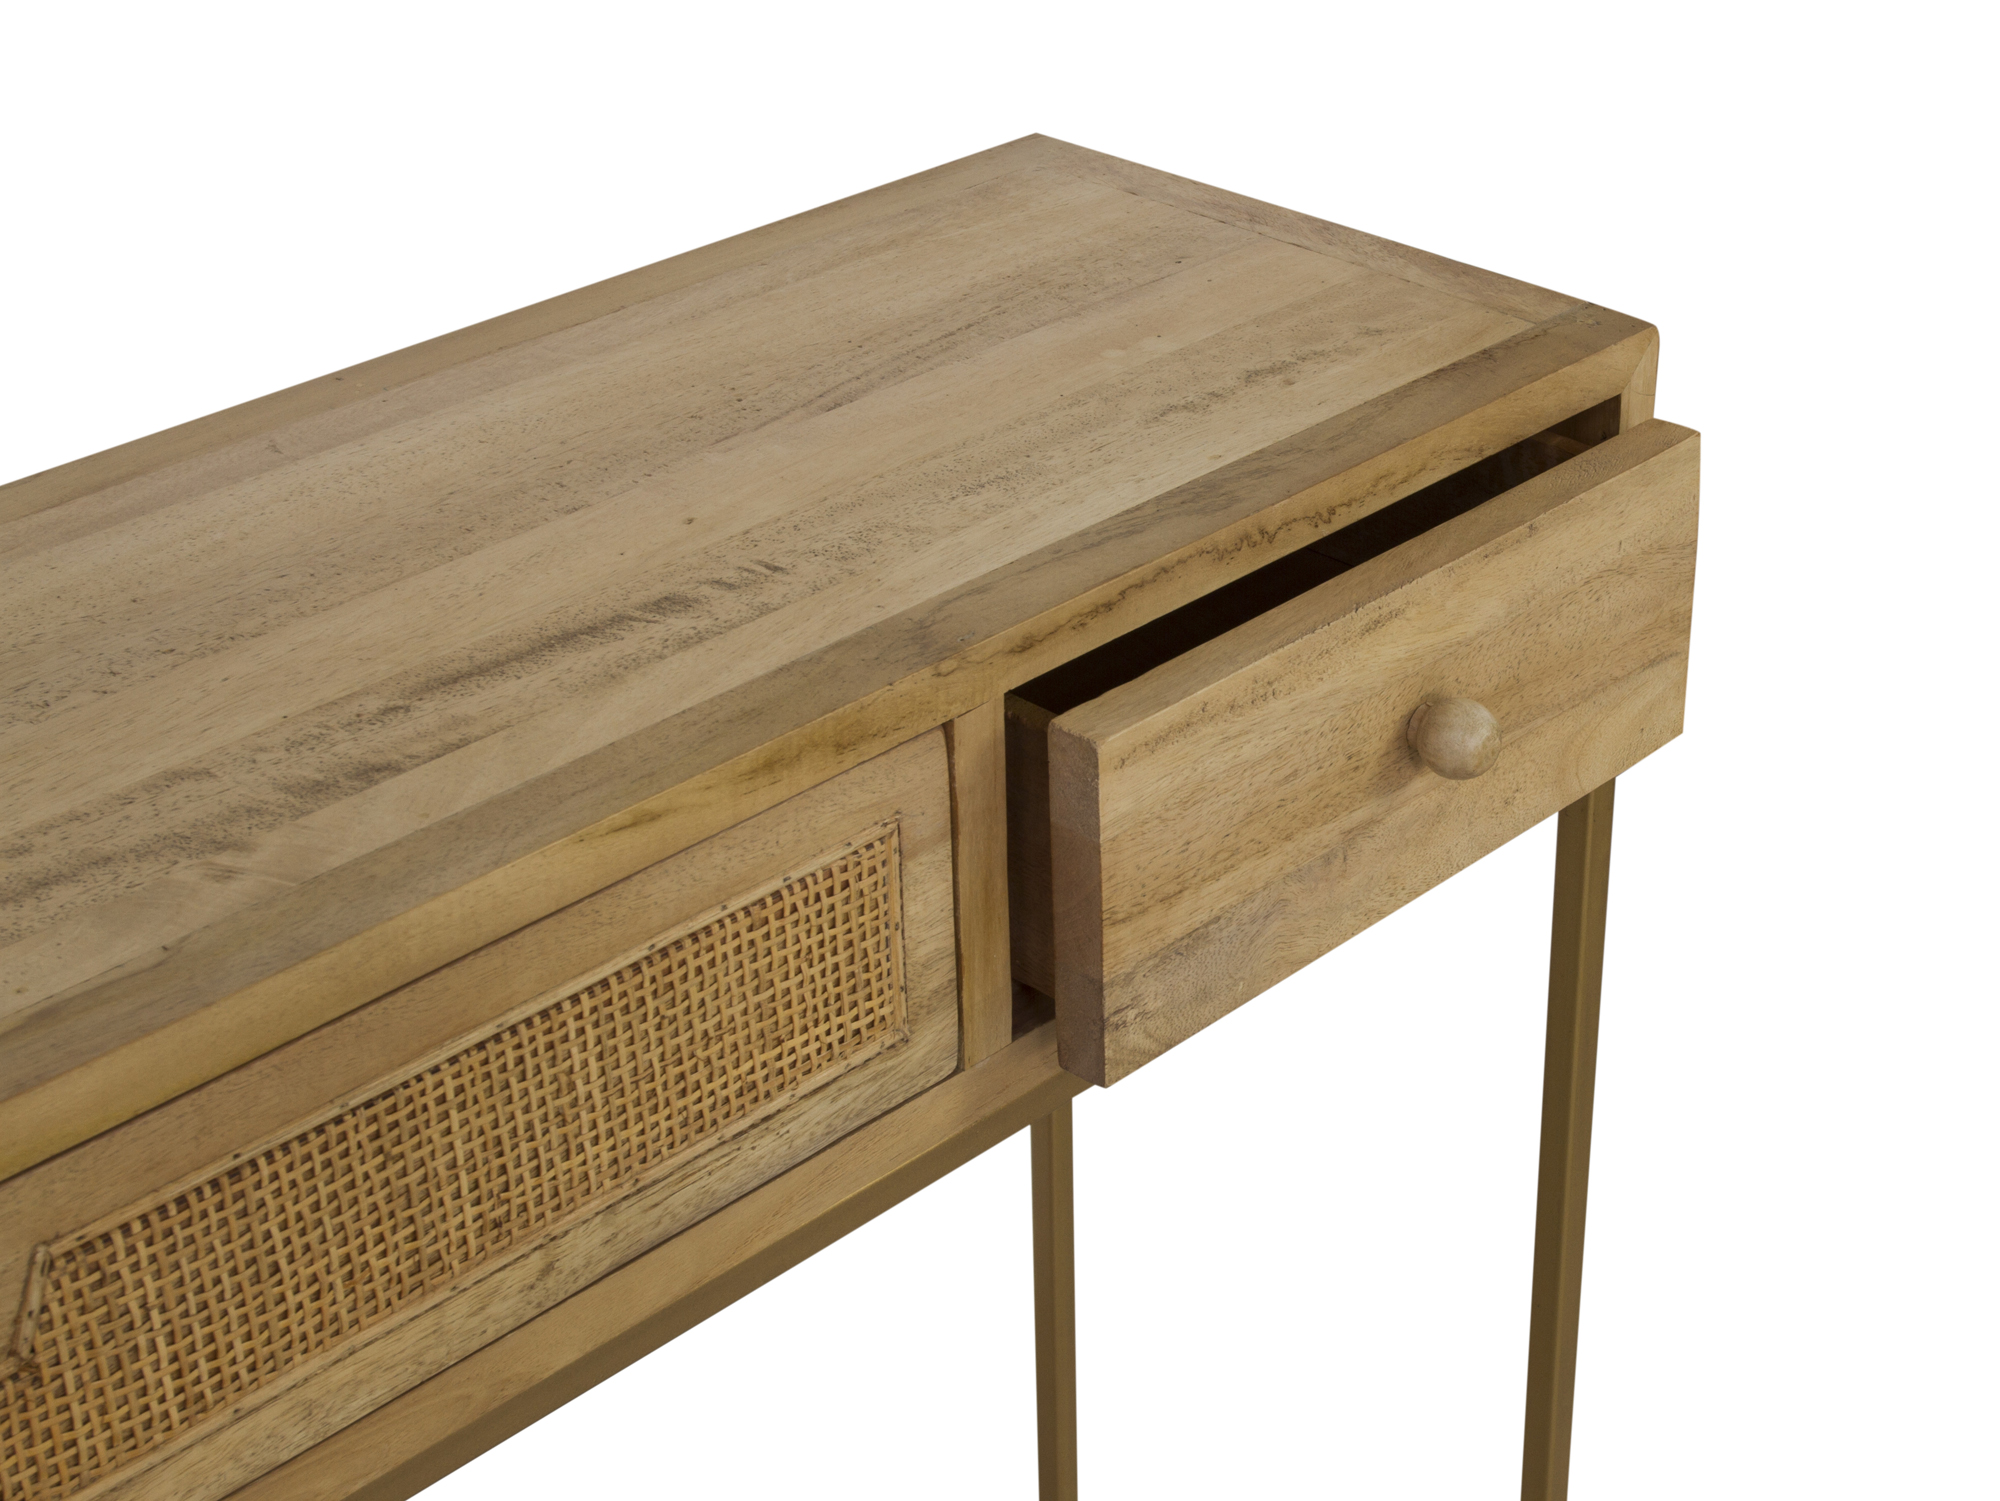 Rattan 2 Drawer Console